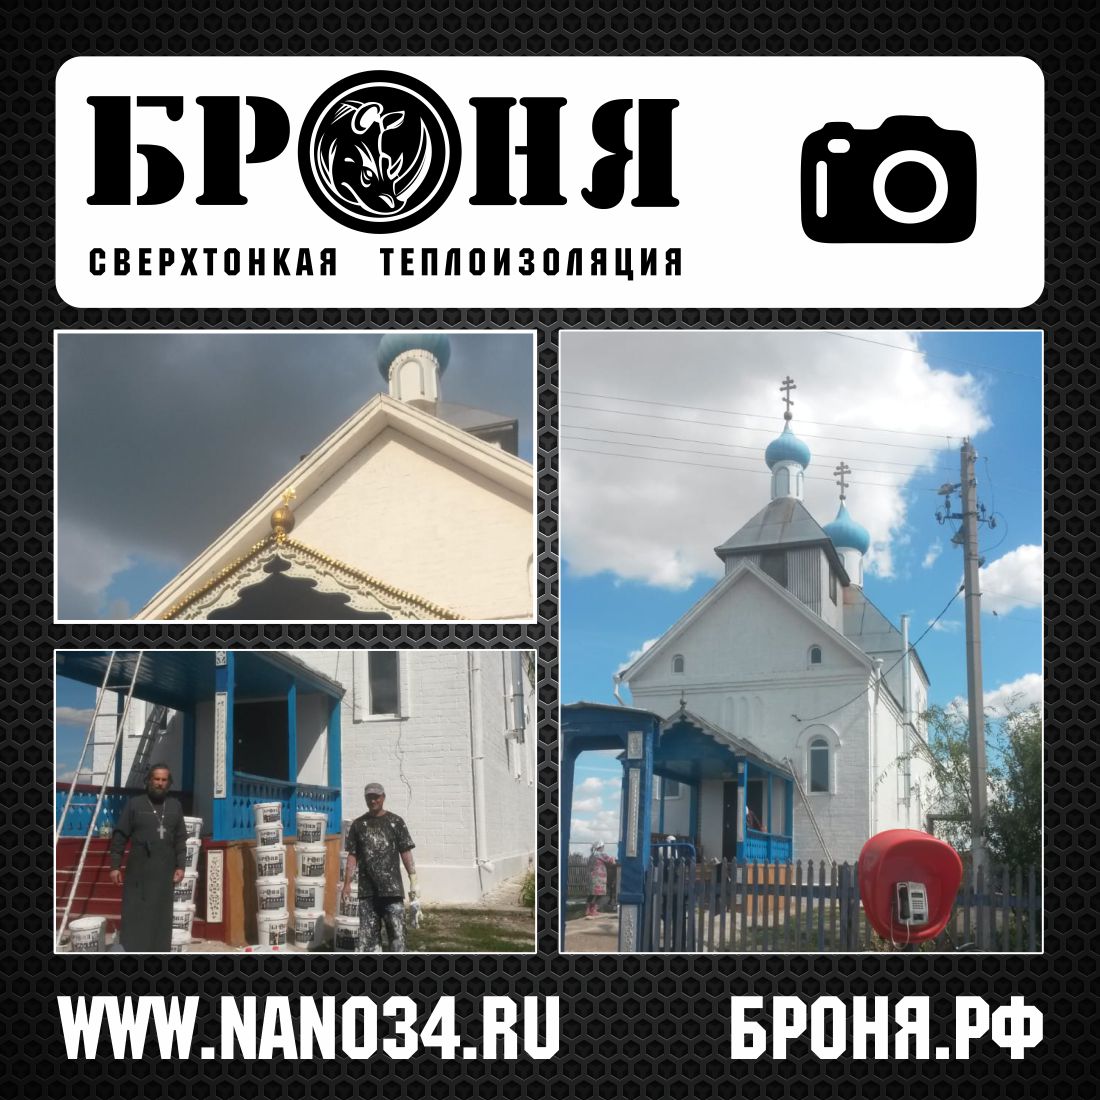 We are pleased to present you a very important and responsible object with the Bronya Facade - Church in honor of the Nativity of Christ (Ulyanovsk Region)